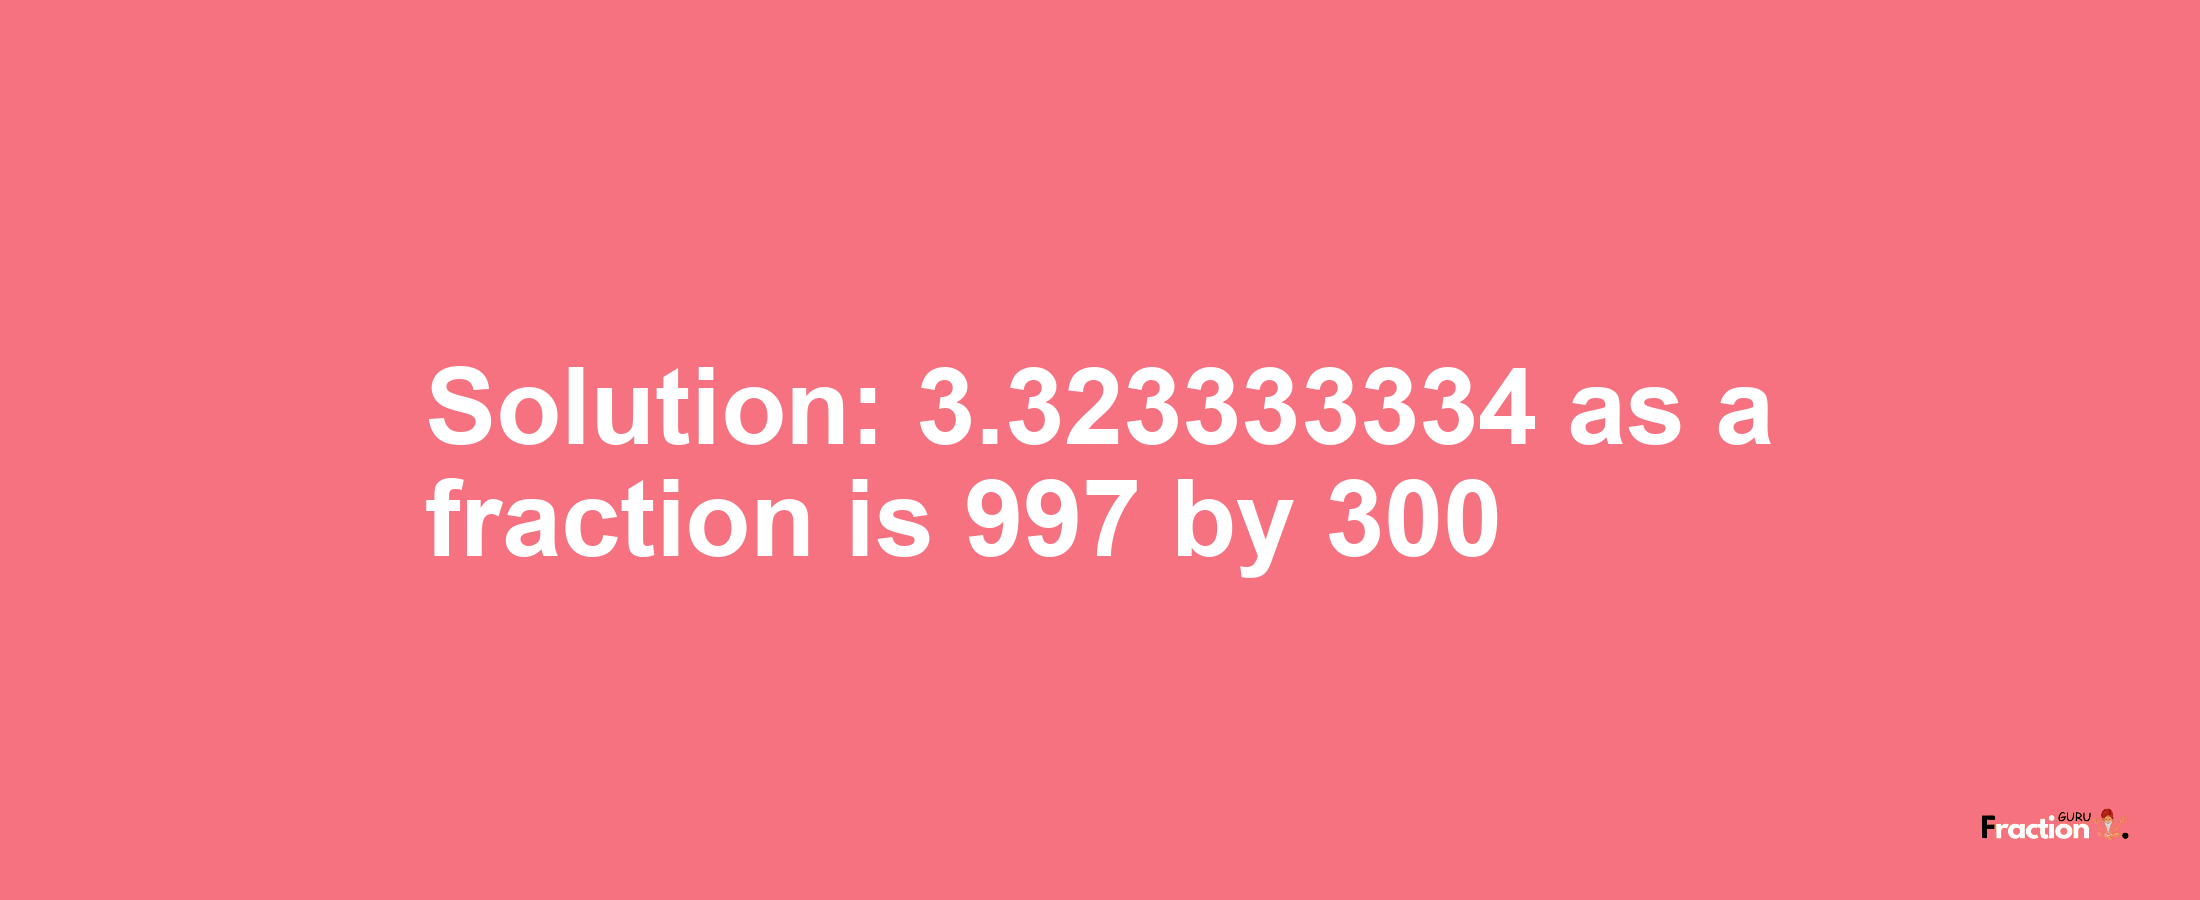 Solution:3.323333334 as a fraction is 997/300